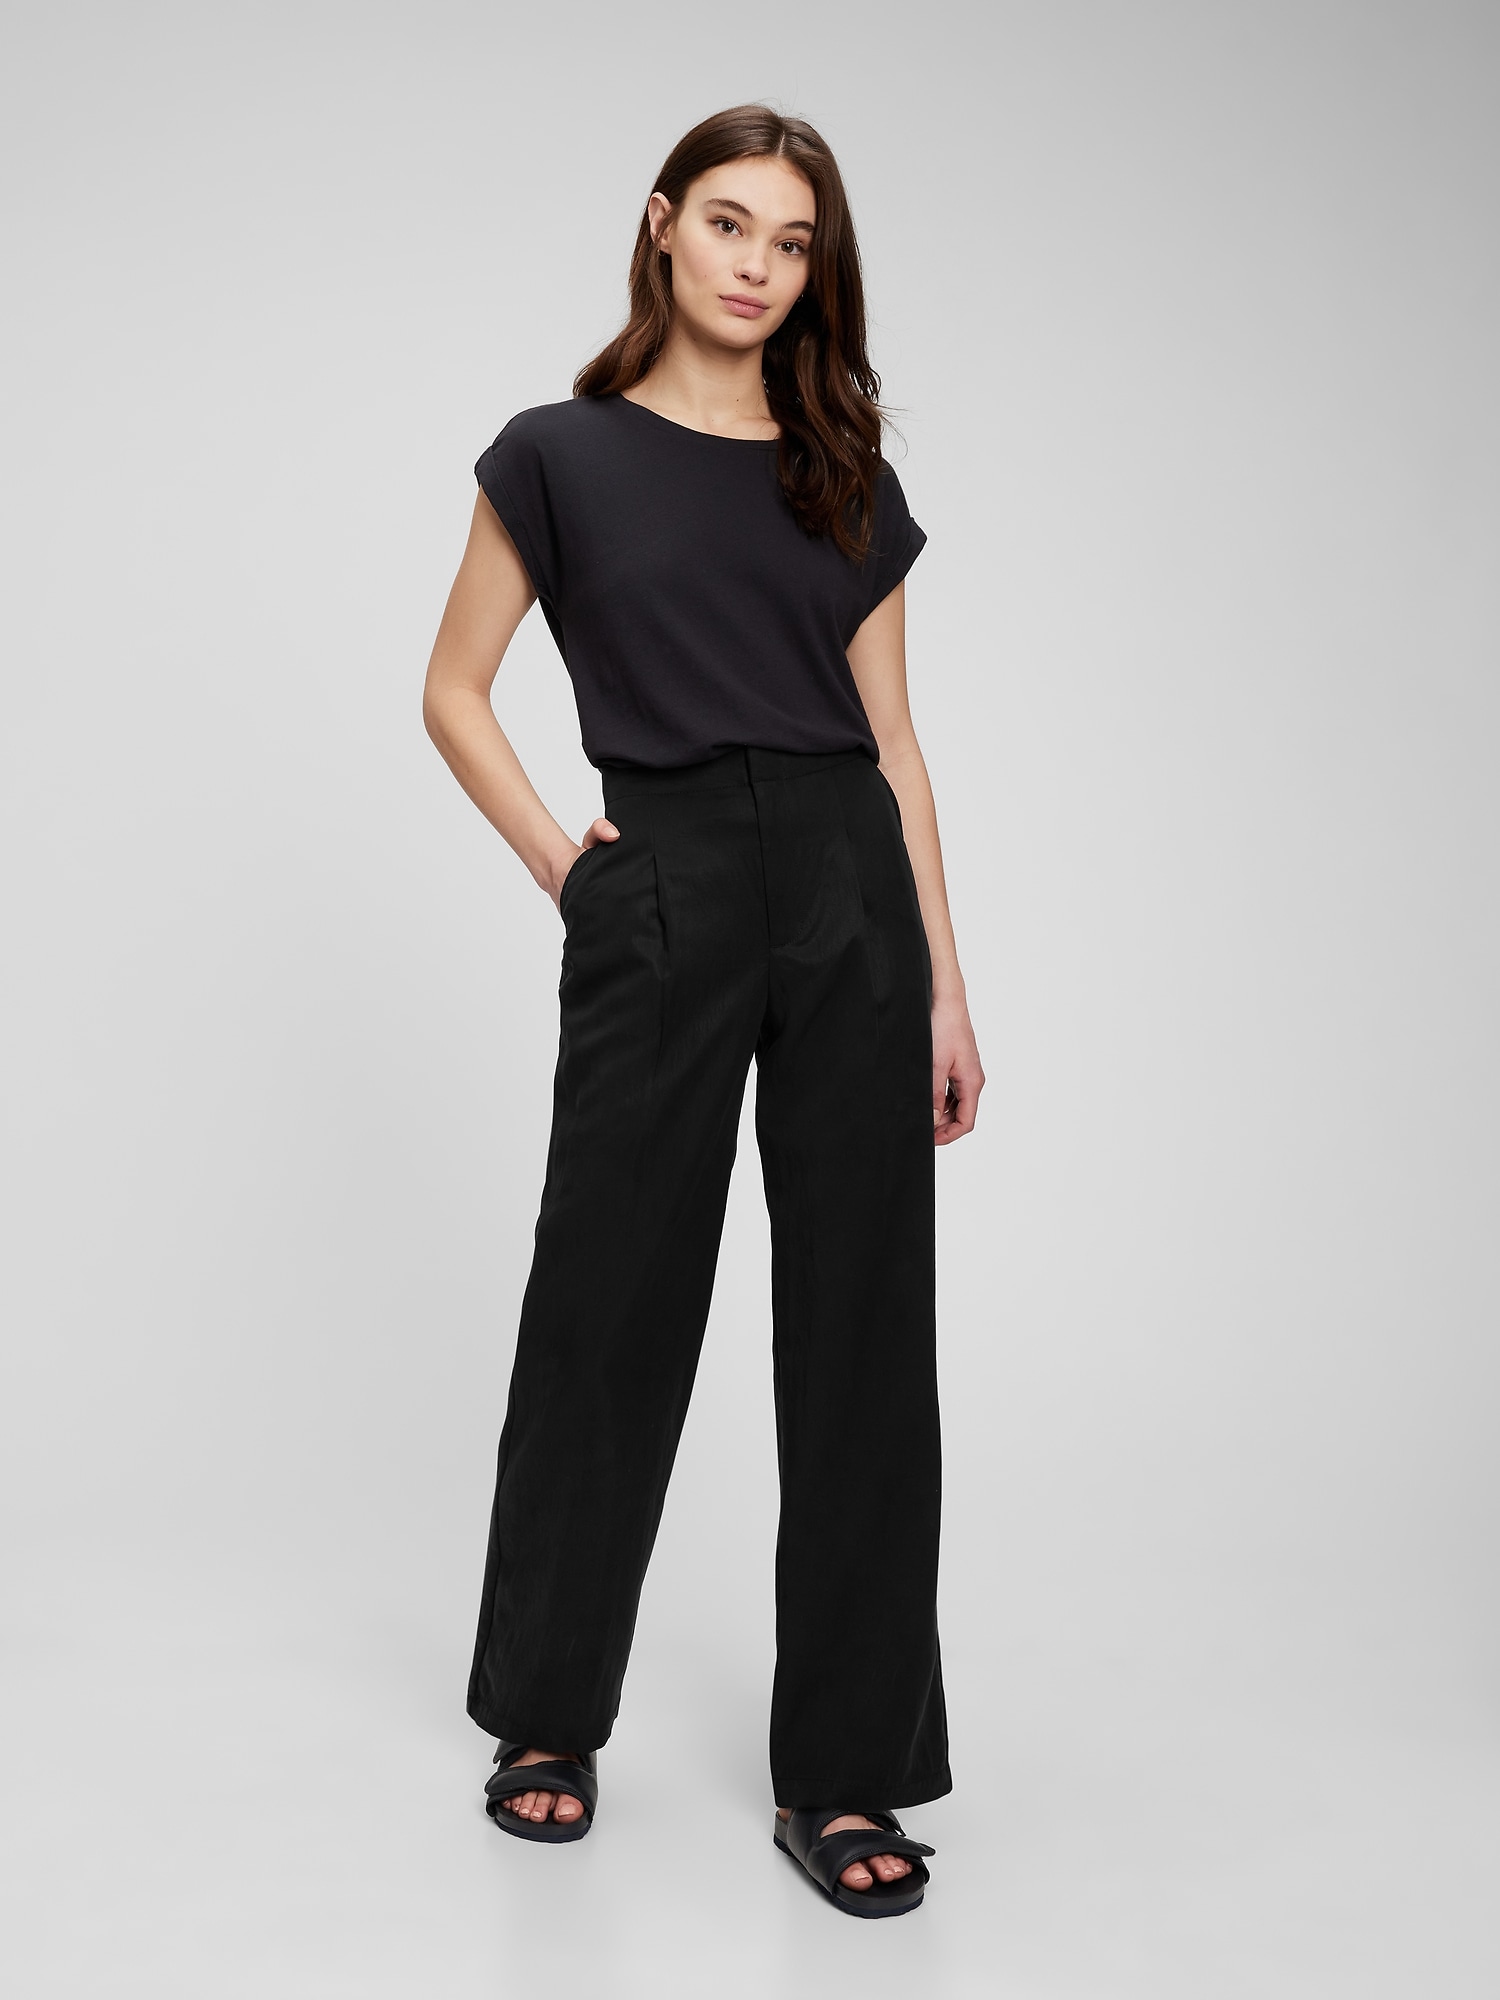 2021 Spring Summer Ankle Length Pants Women Business Casual Trousers Female  Work Wear Office Lady Career High Waist Pants L66  Pants  Capris   AliExpress